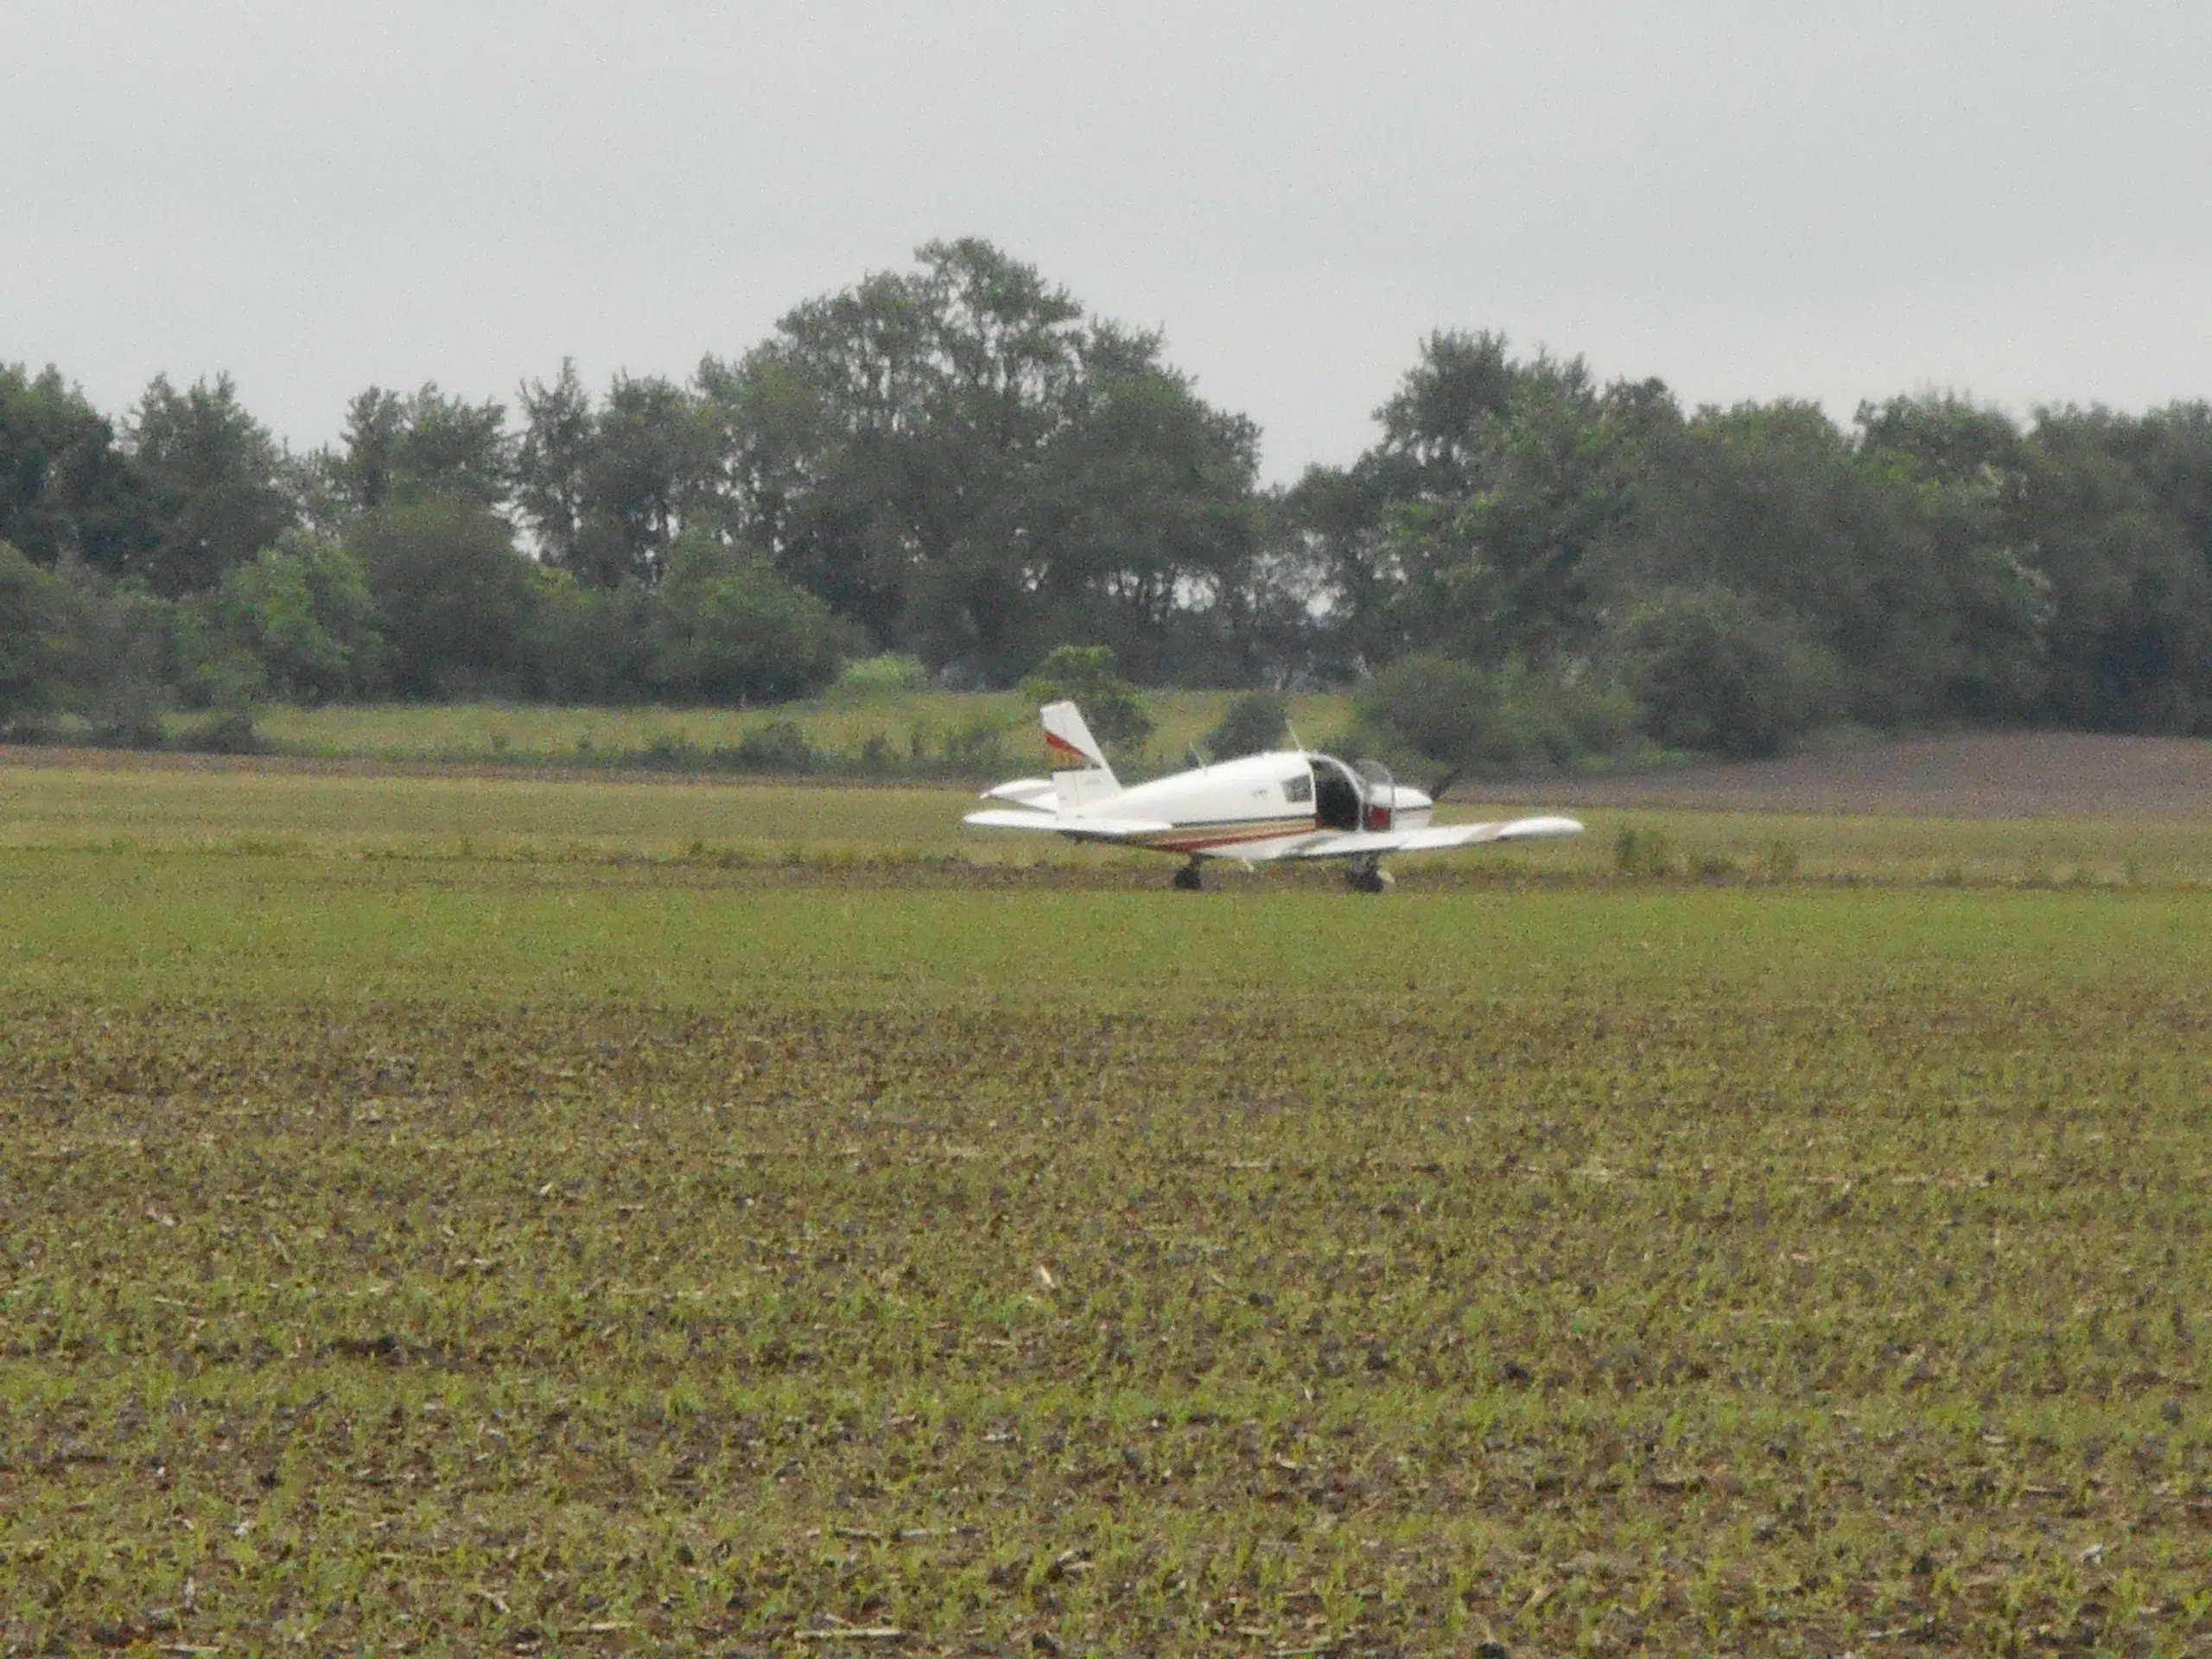 Fayette Co Sheriff's Office handles plane crash on Friday night, pilot suffered minor injuries